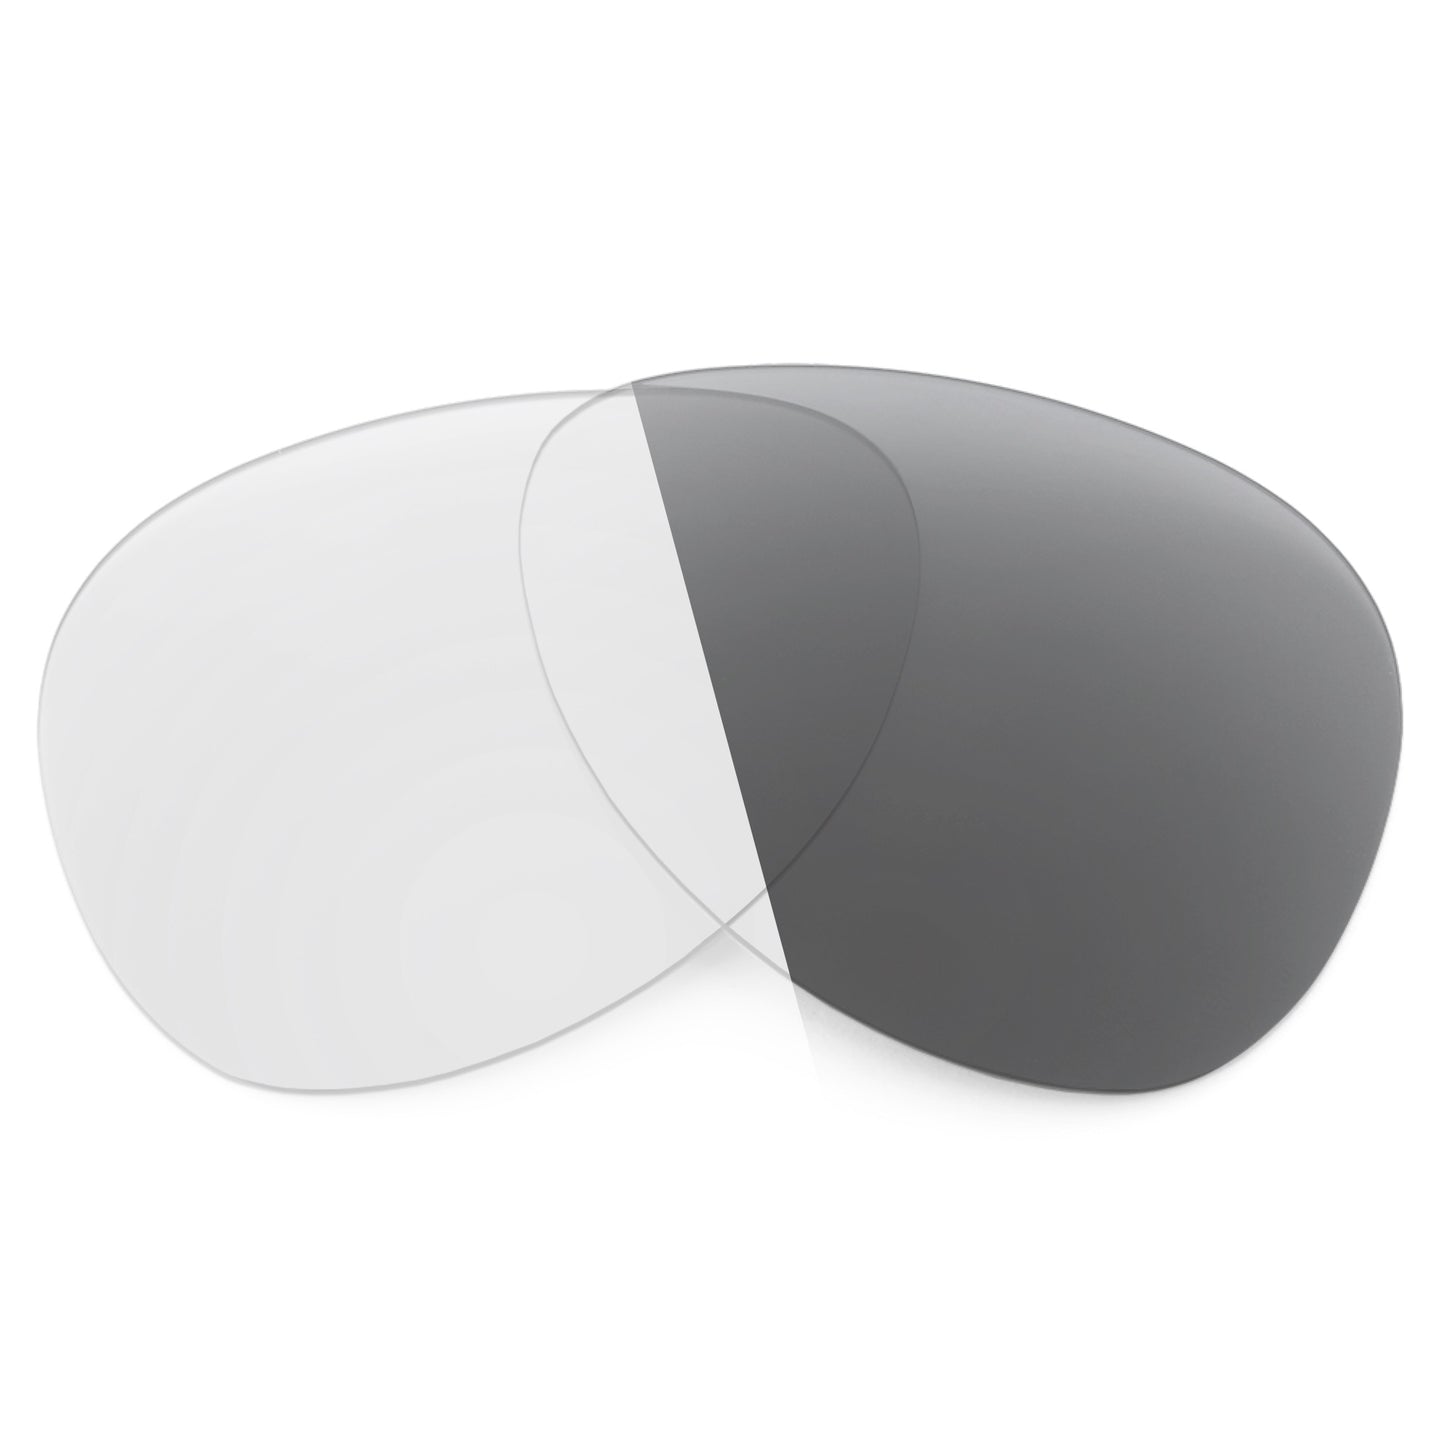 Revant replacement lenses for Ray-Ban RB3386 63mm Non-Polarized Adapt Gray Photochromic